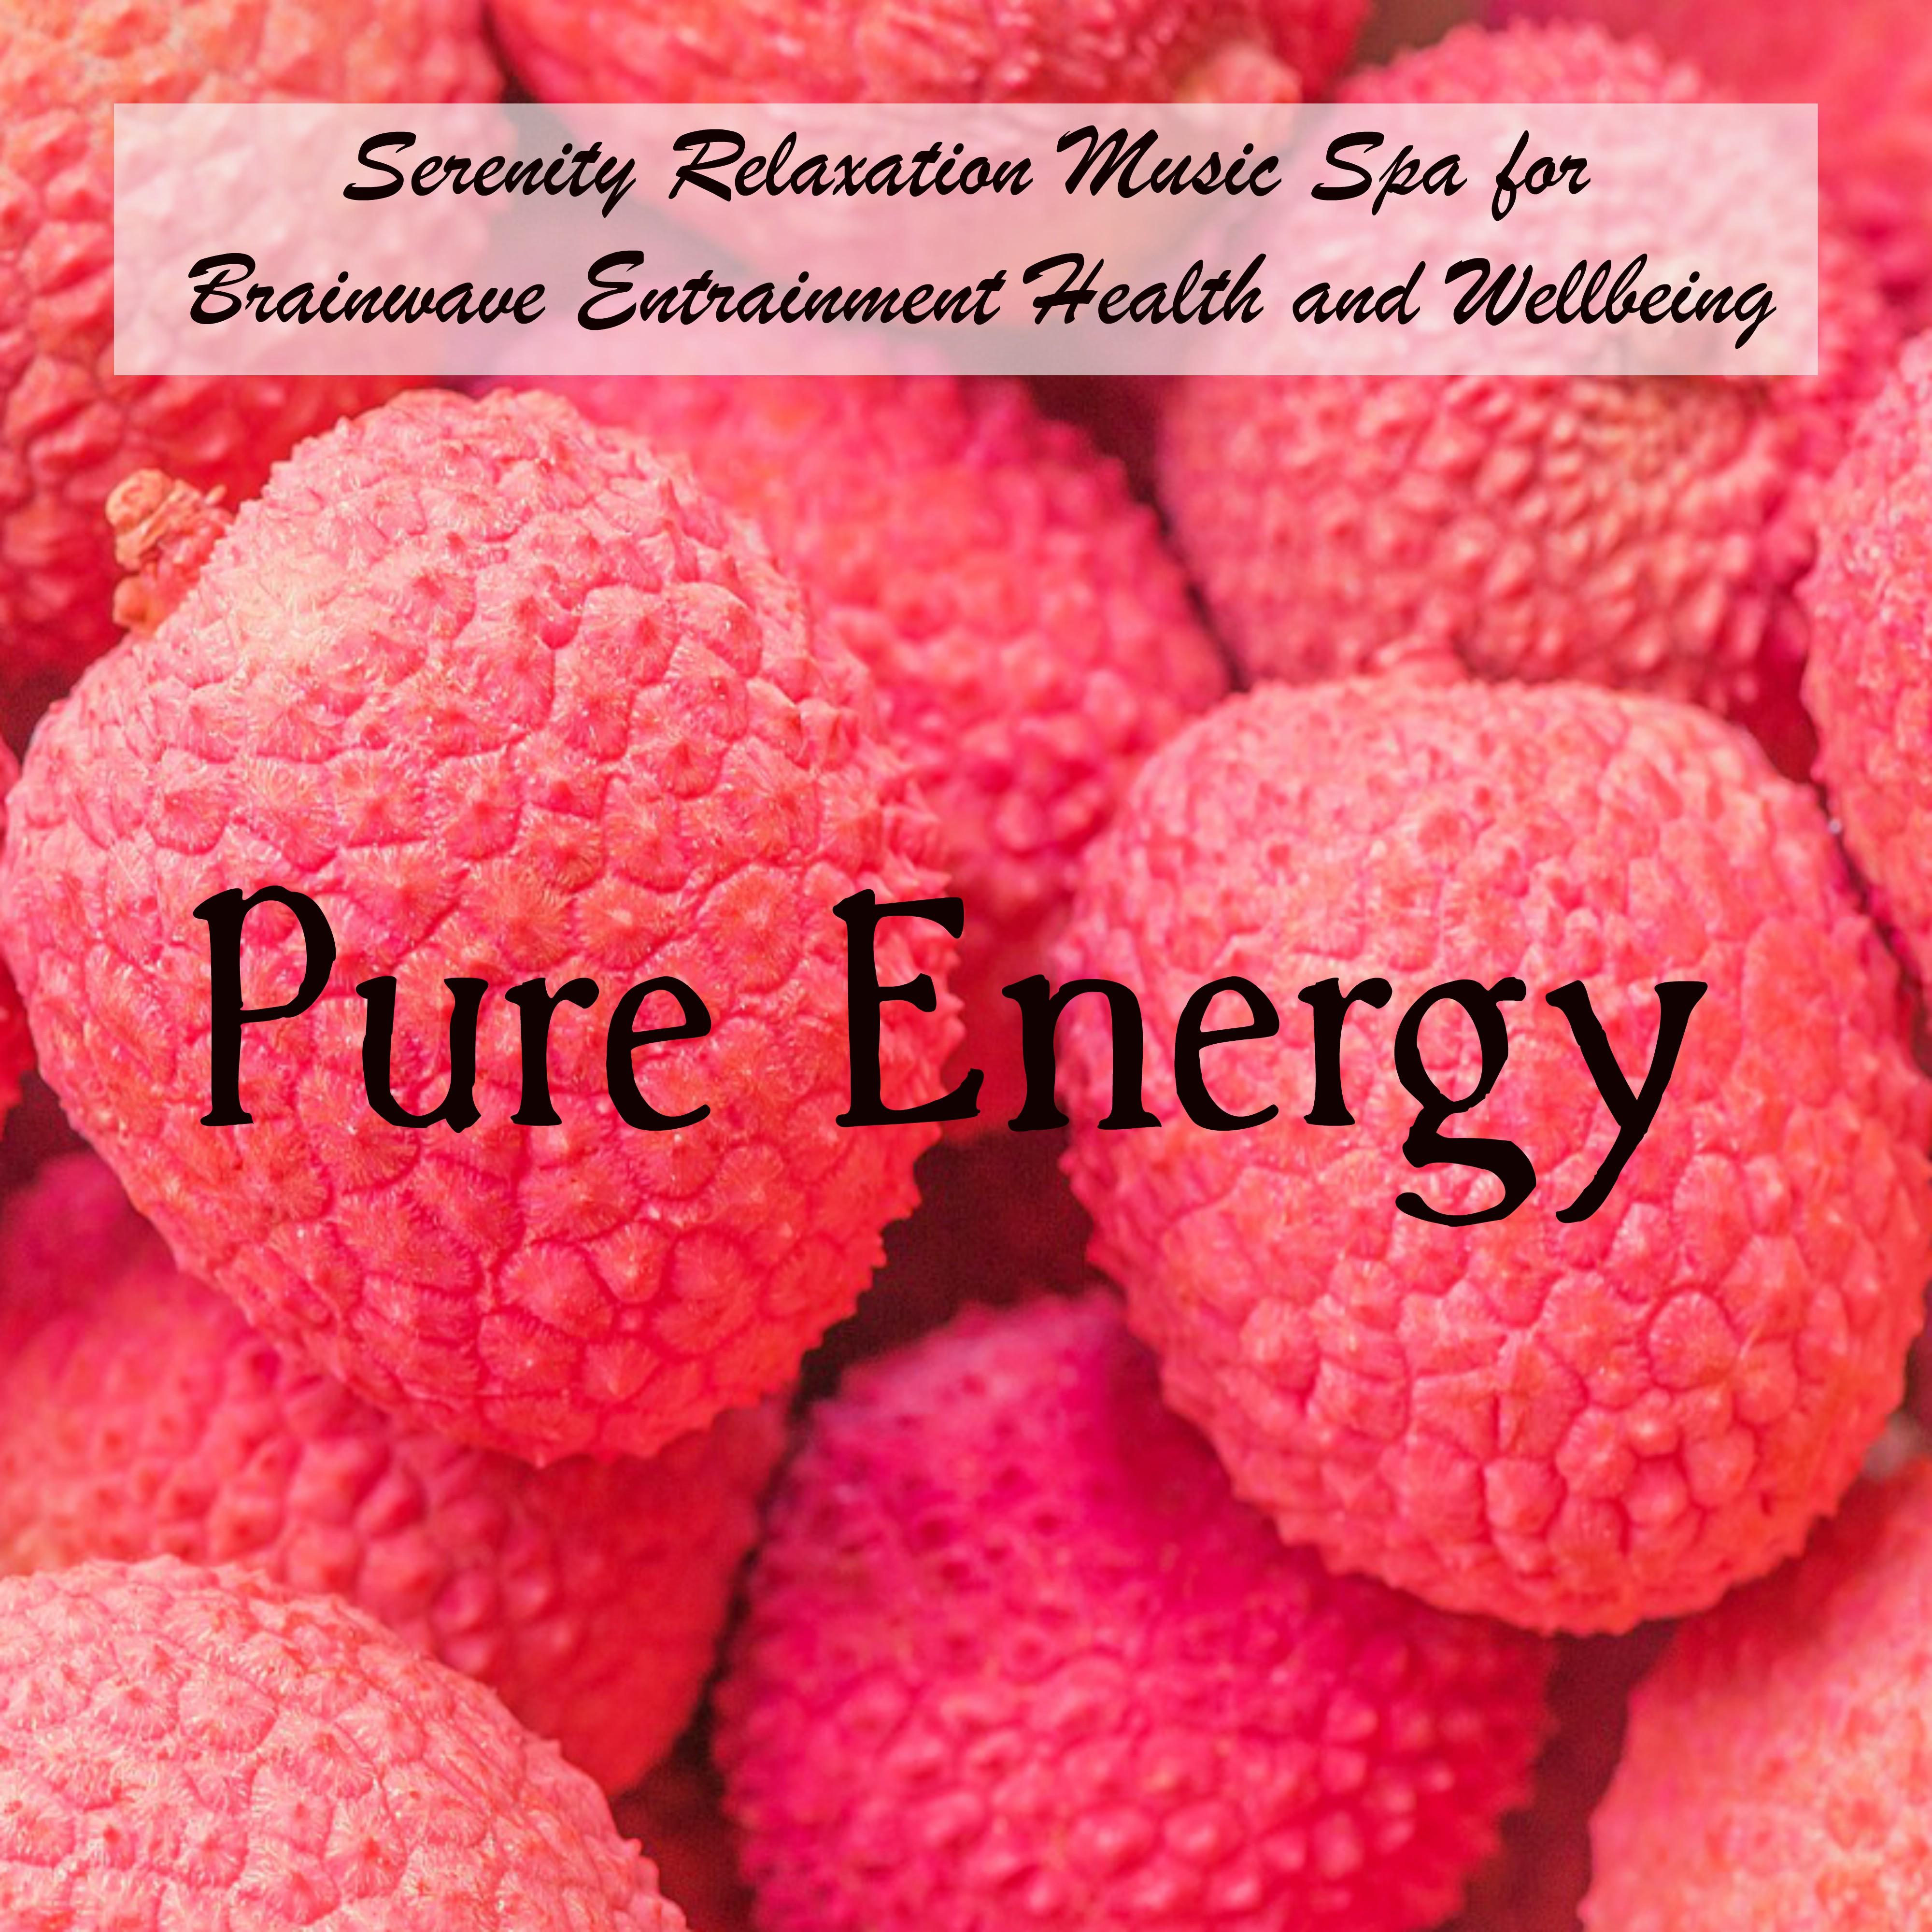 Pure Energy - Serenity Relaxation Music Spa for Brainwave Entrainment Health and Wellbeing